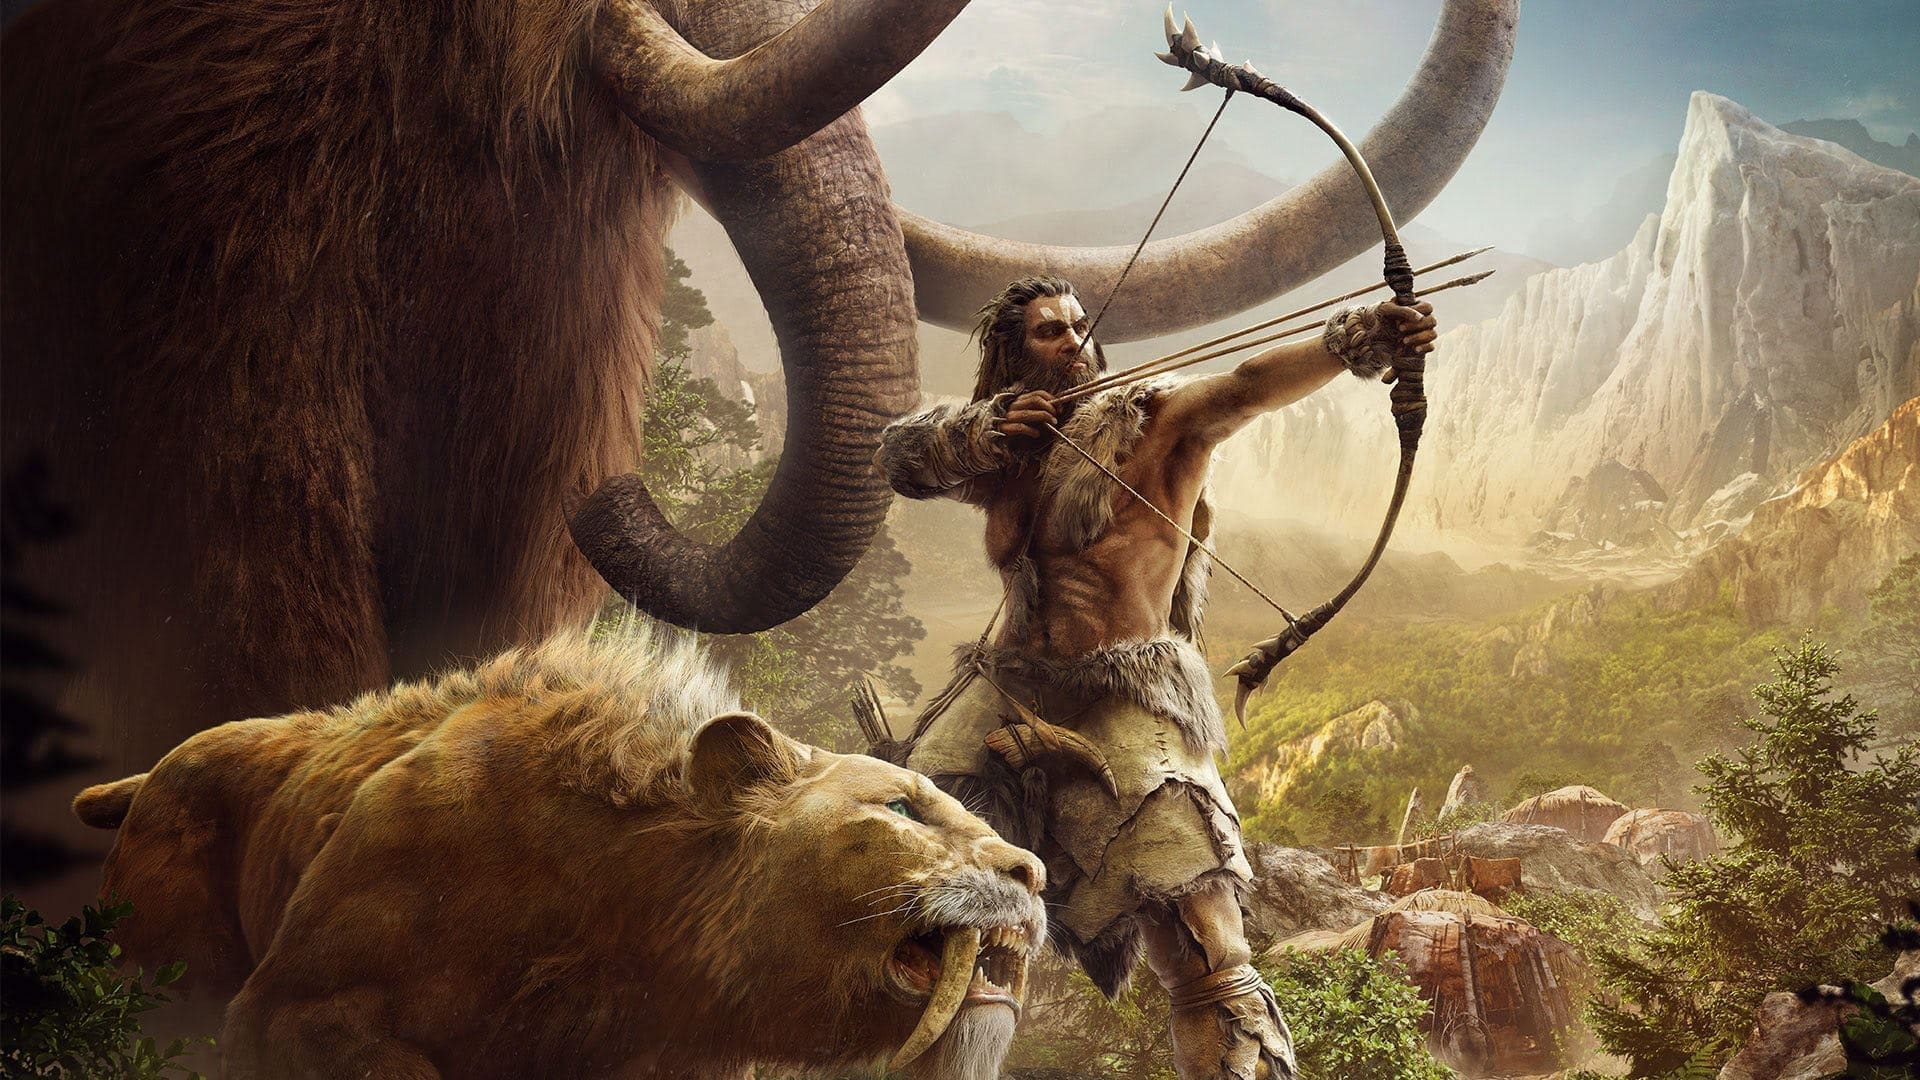 far cry, Primal, review, Ubisoft, video game